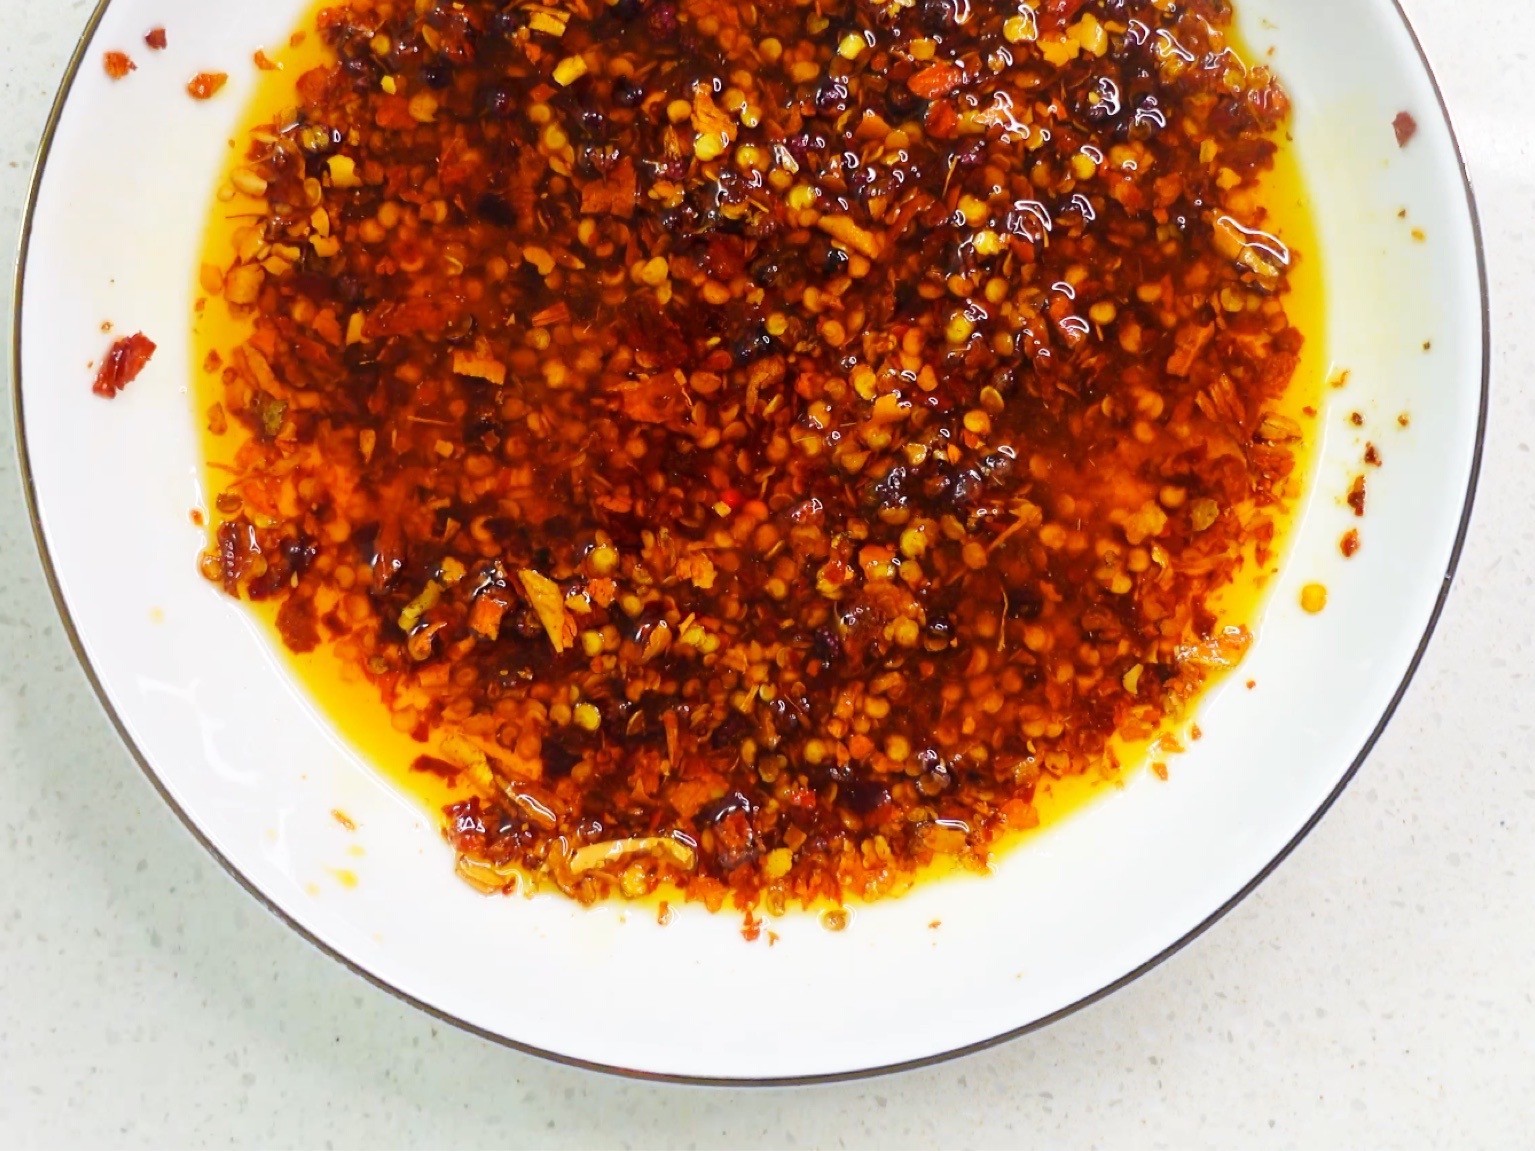 How to Make Chili Oil (+ Tips and Variations) - Alphafoodie